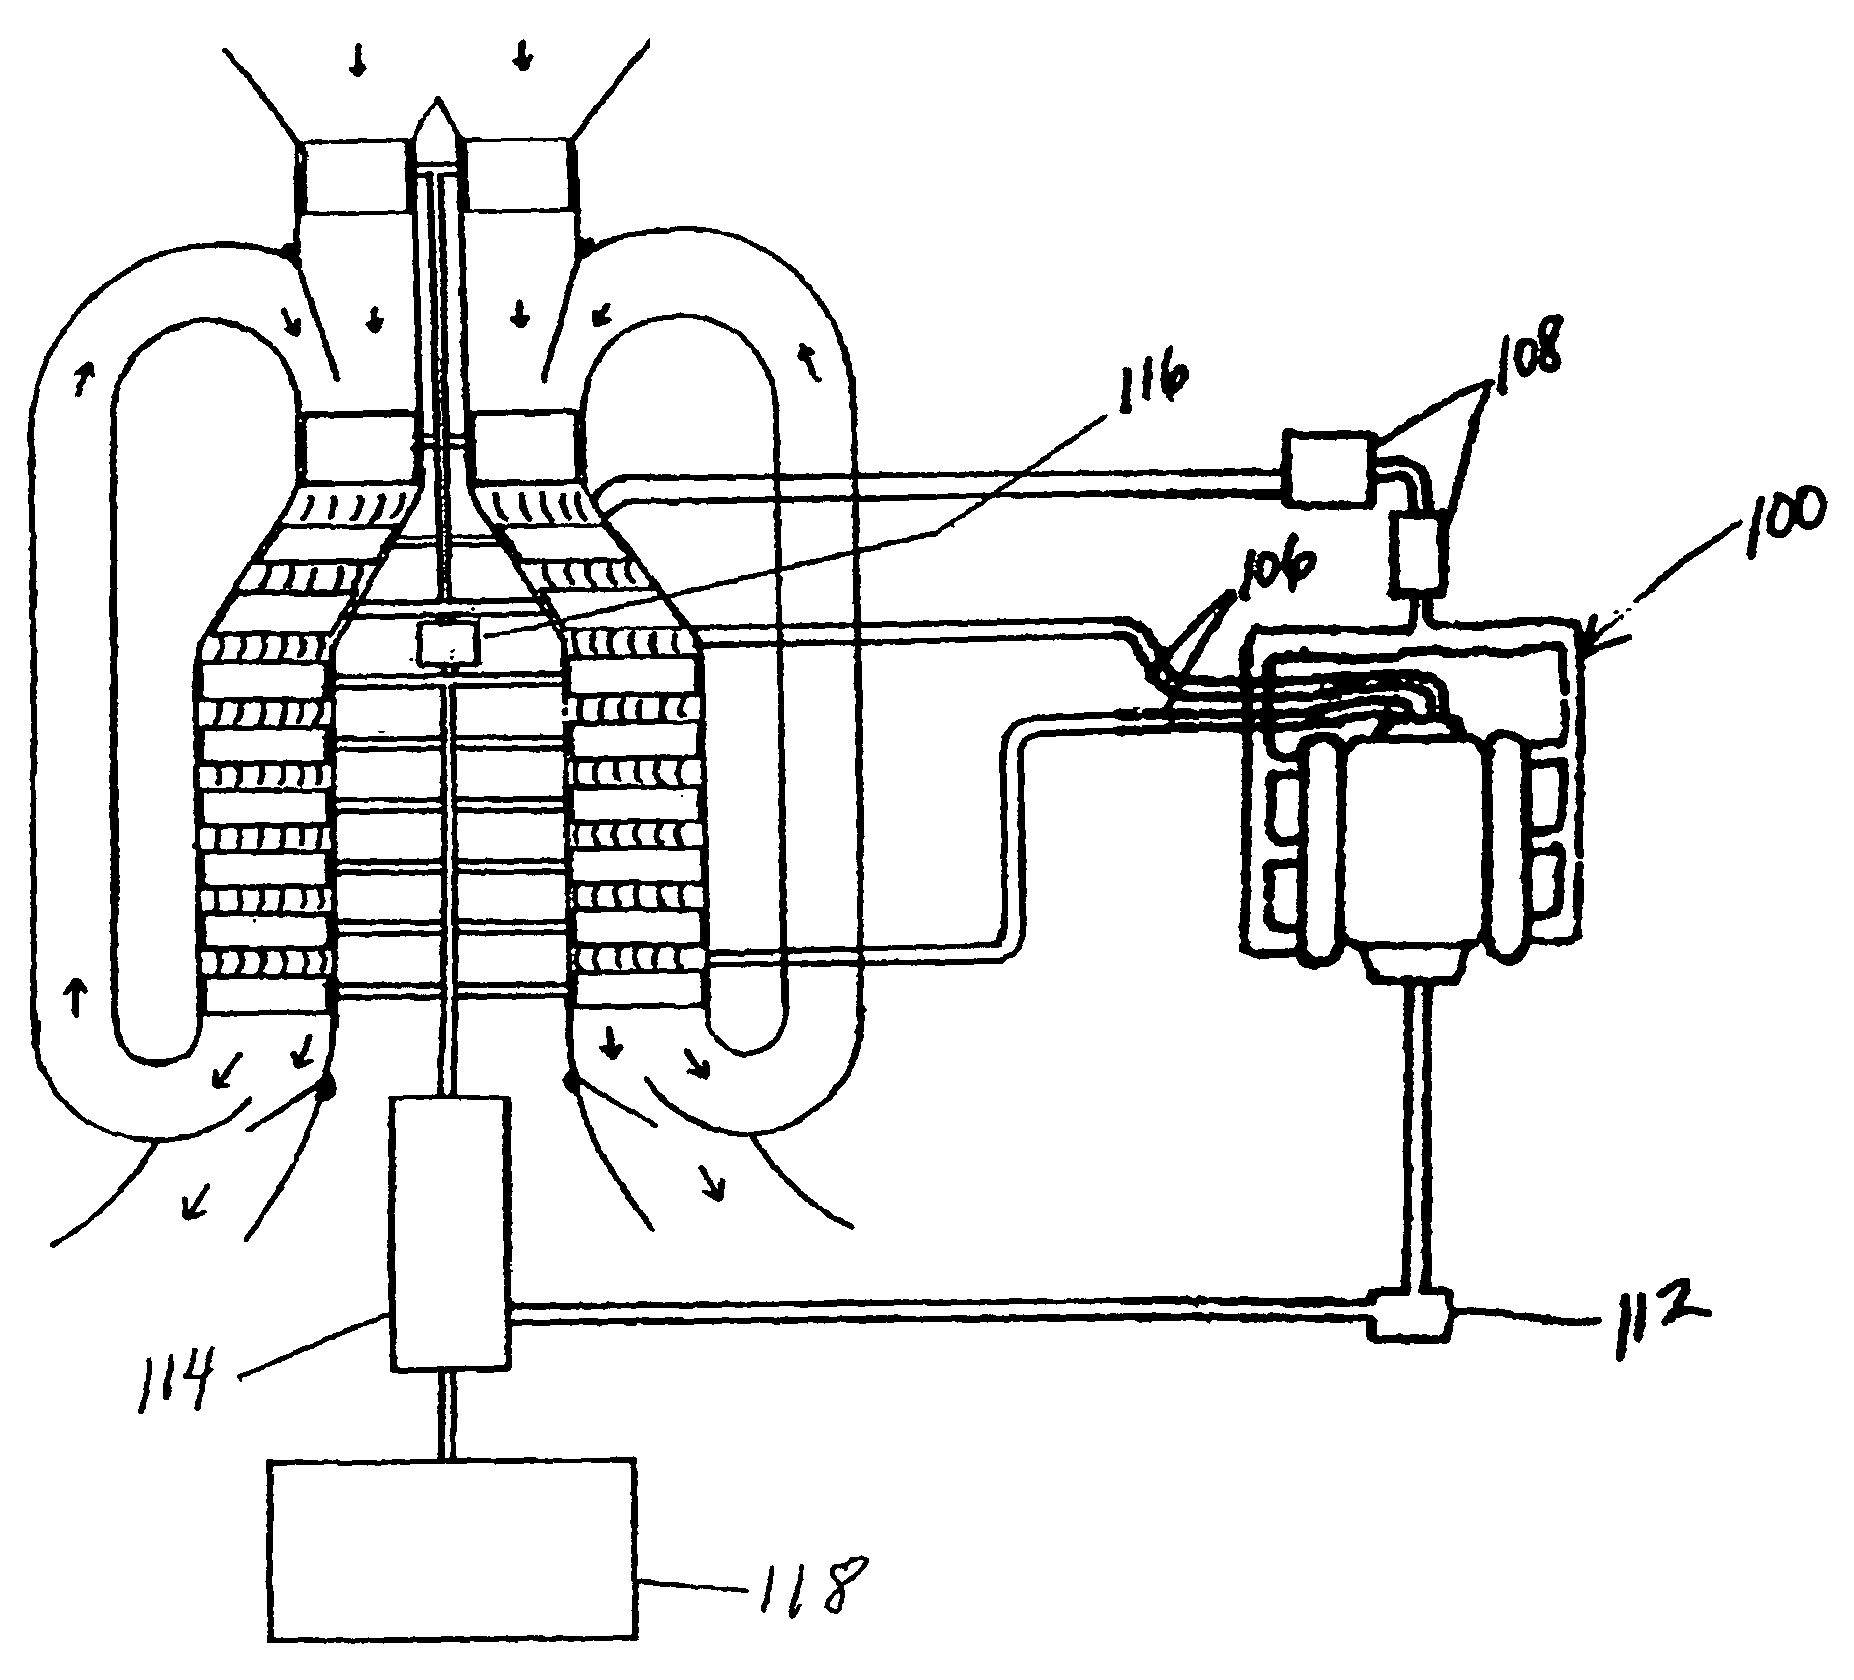 Air turbine with recycled air or gear mechanism to increase internal velocity for engine power